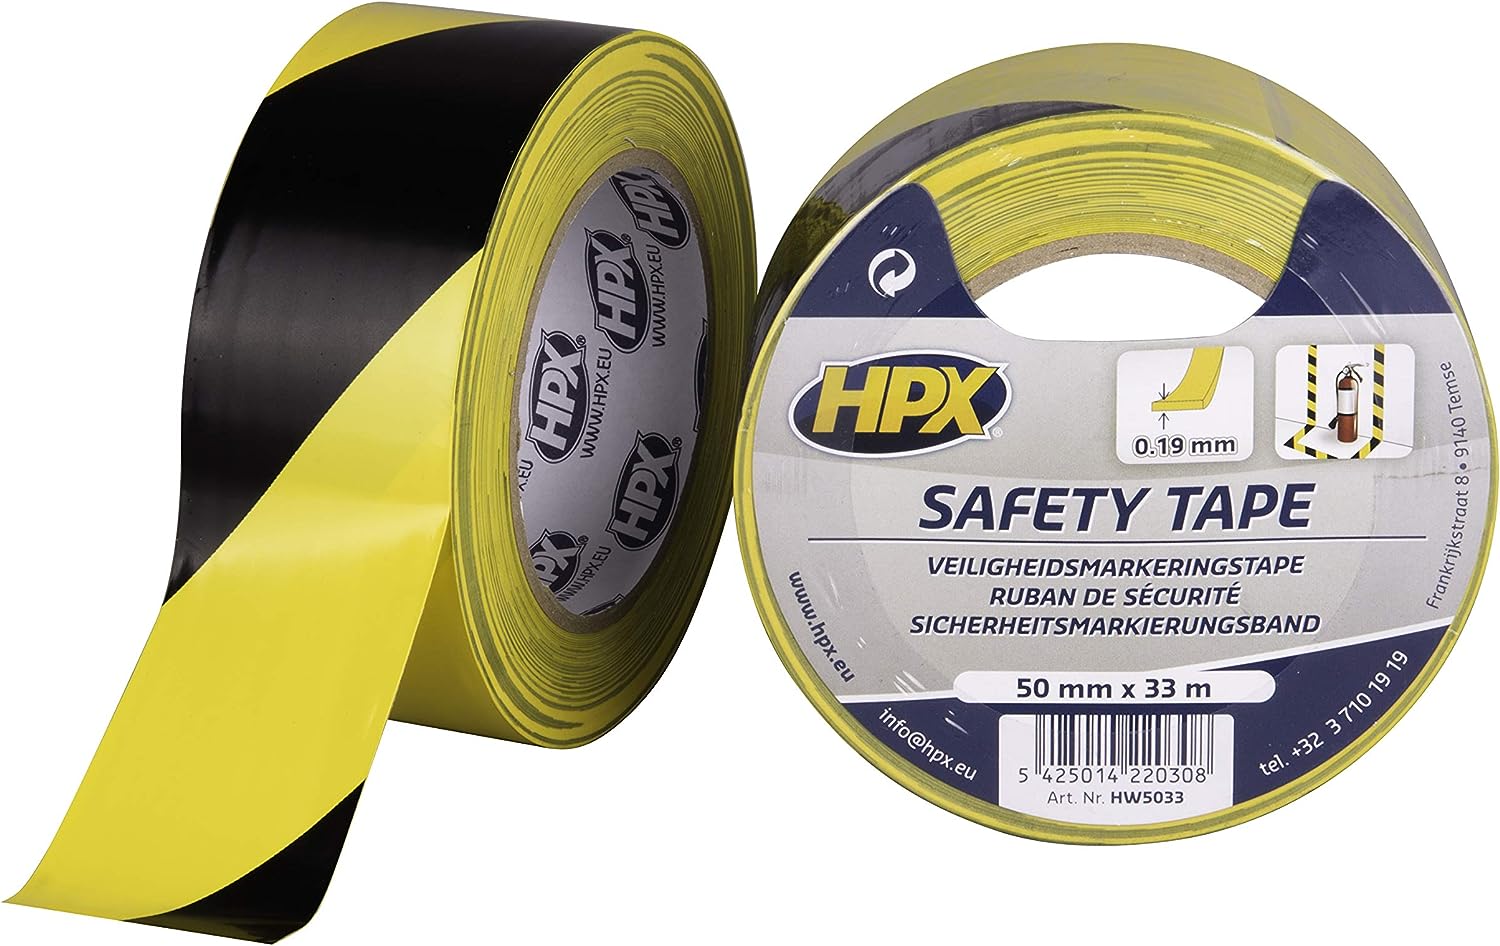 Security marking tape 50mm x 33m yellow / black